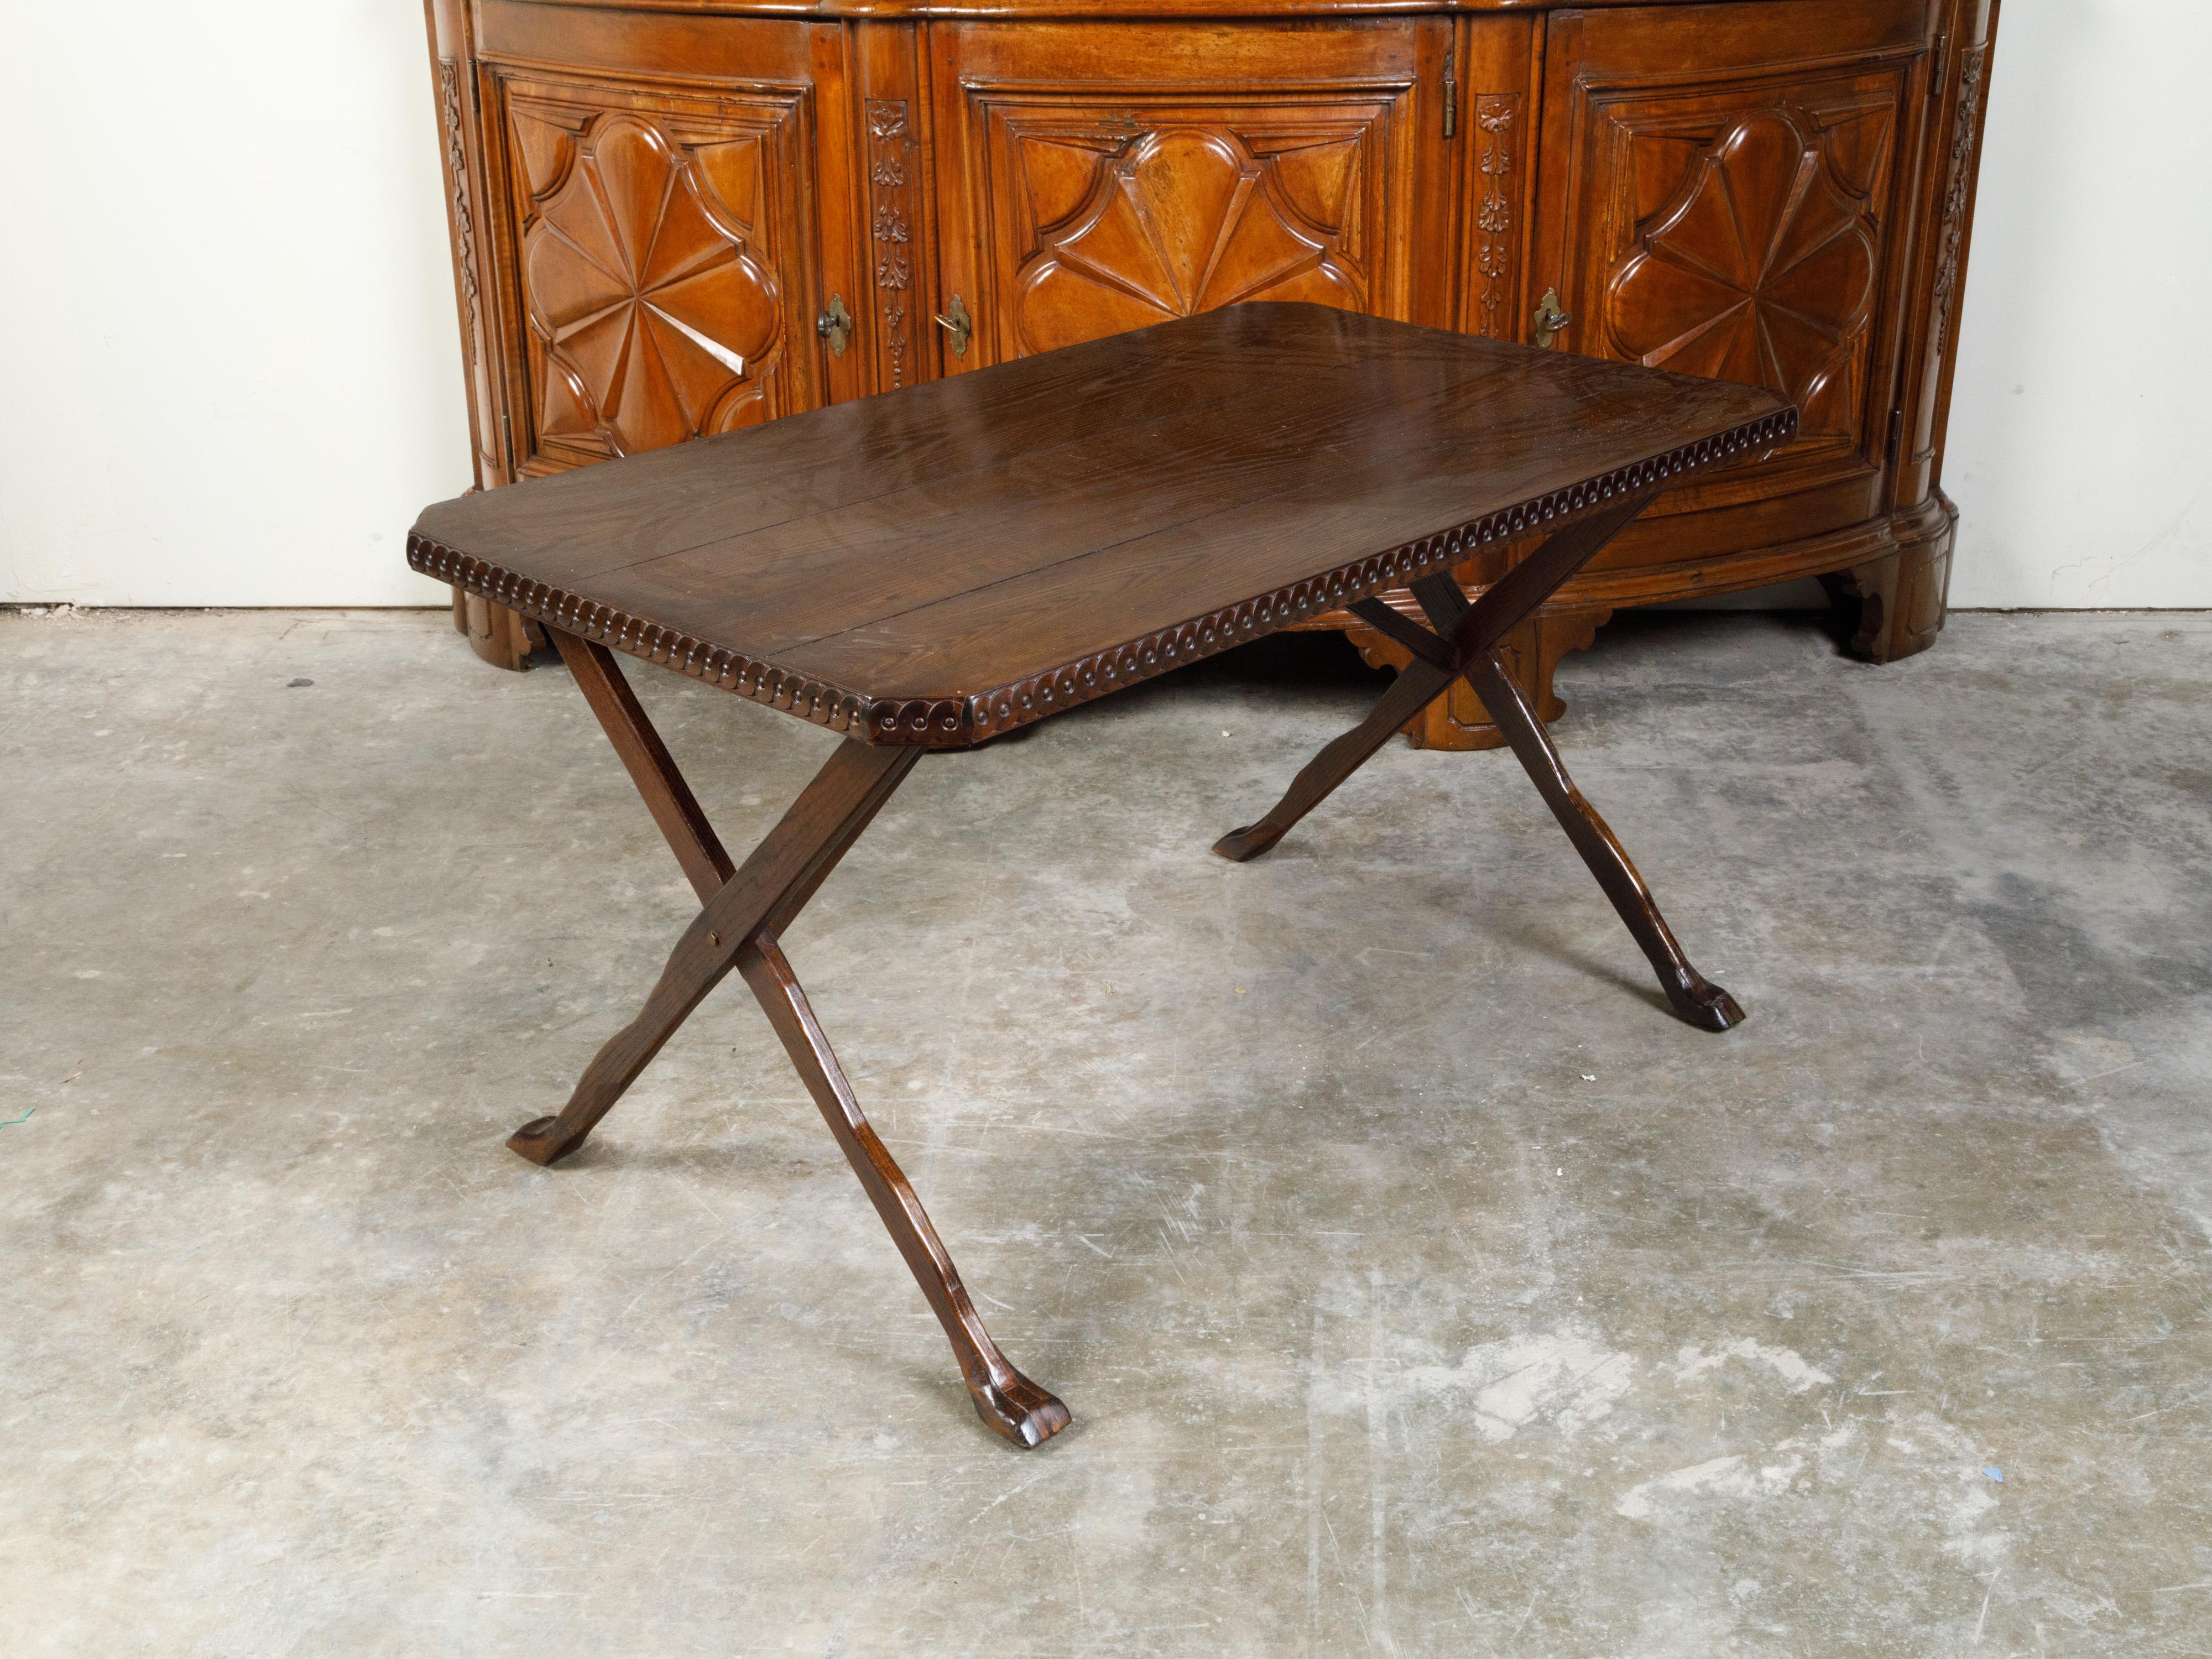 Italian 19th Century Oak Side Table with Carved Guilloche Frieze and X-Form Legs For Sale 3